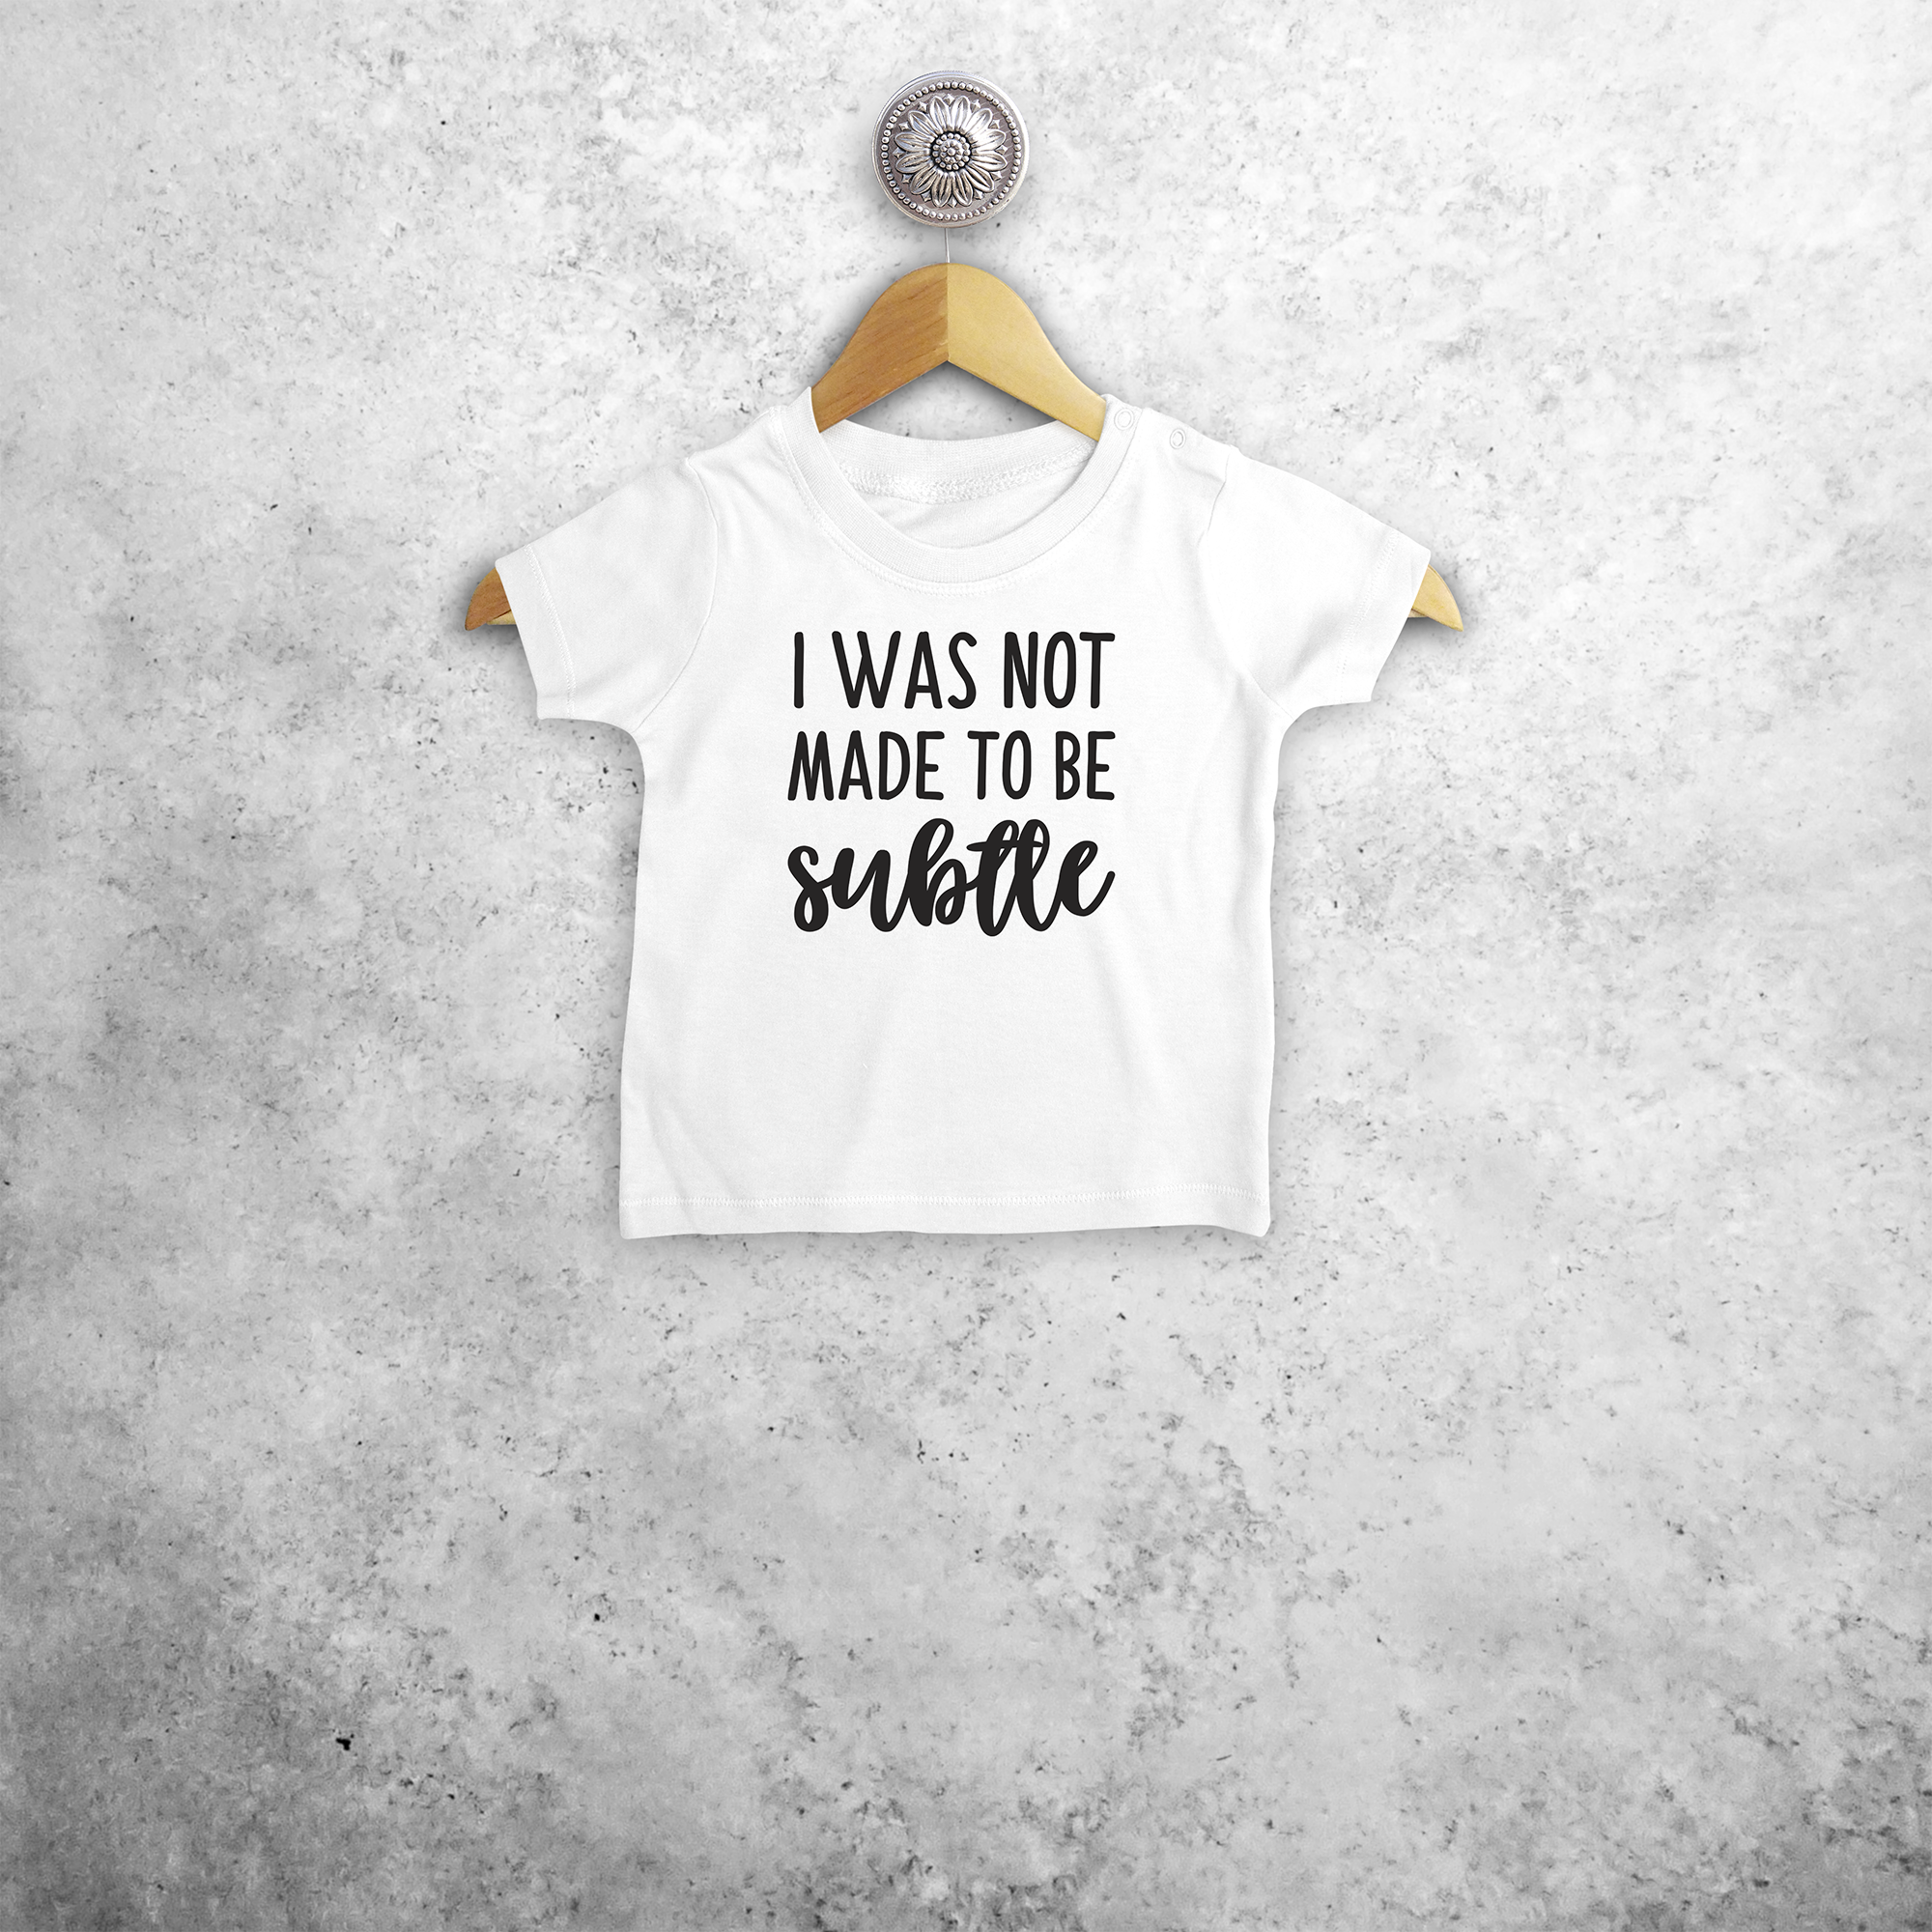 'I was not made to be subtle' baby shortsleeve shirt